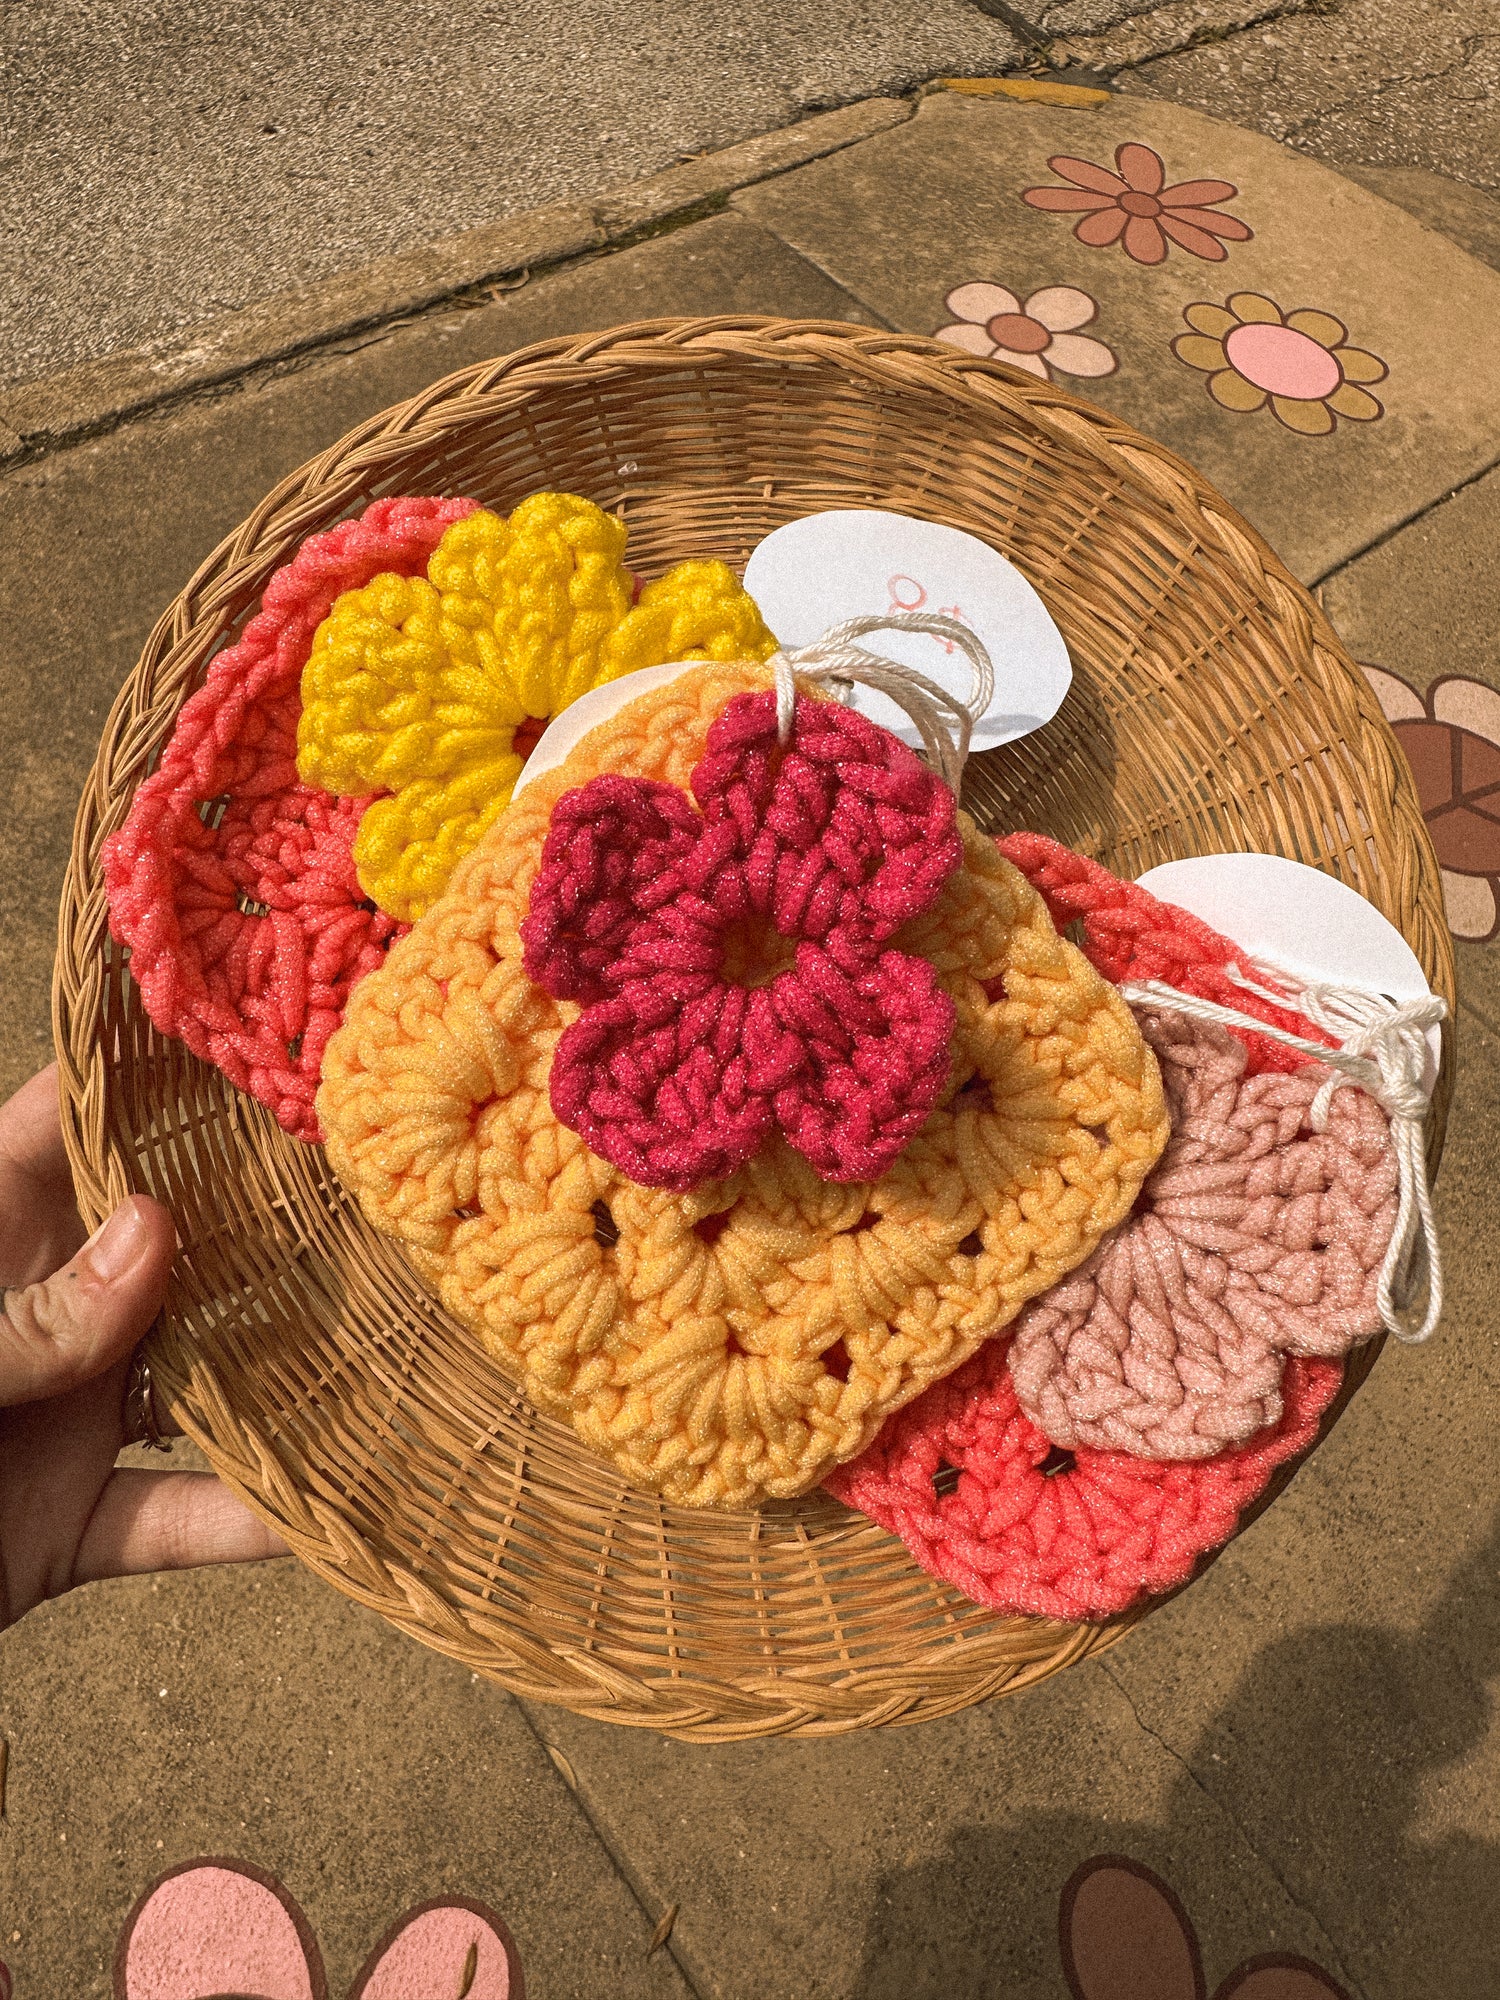 Groovy Crocheted Dish Scrubber Pads